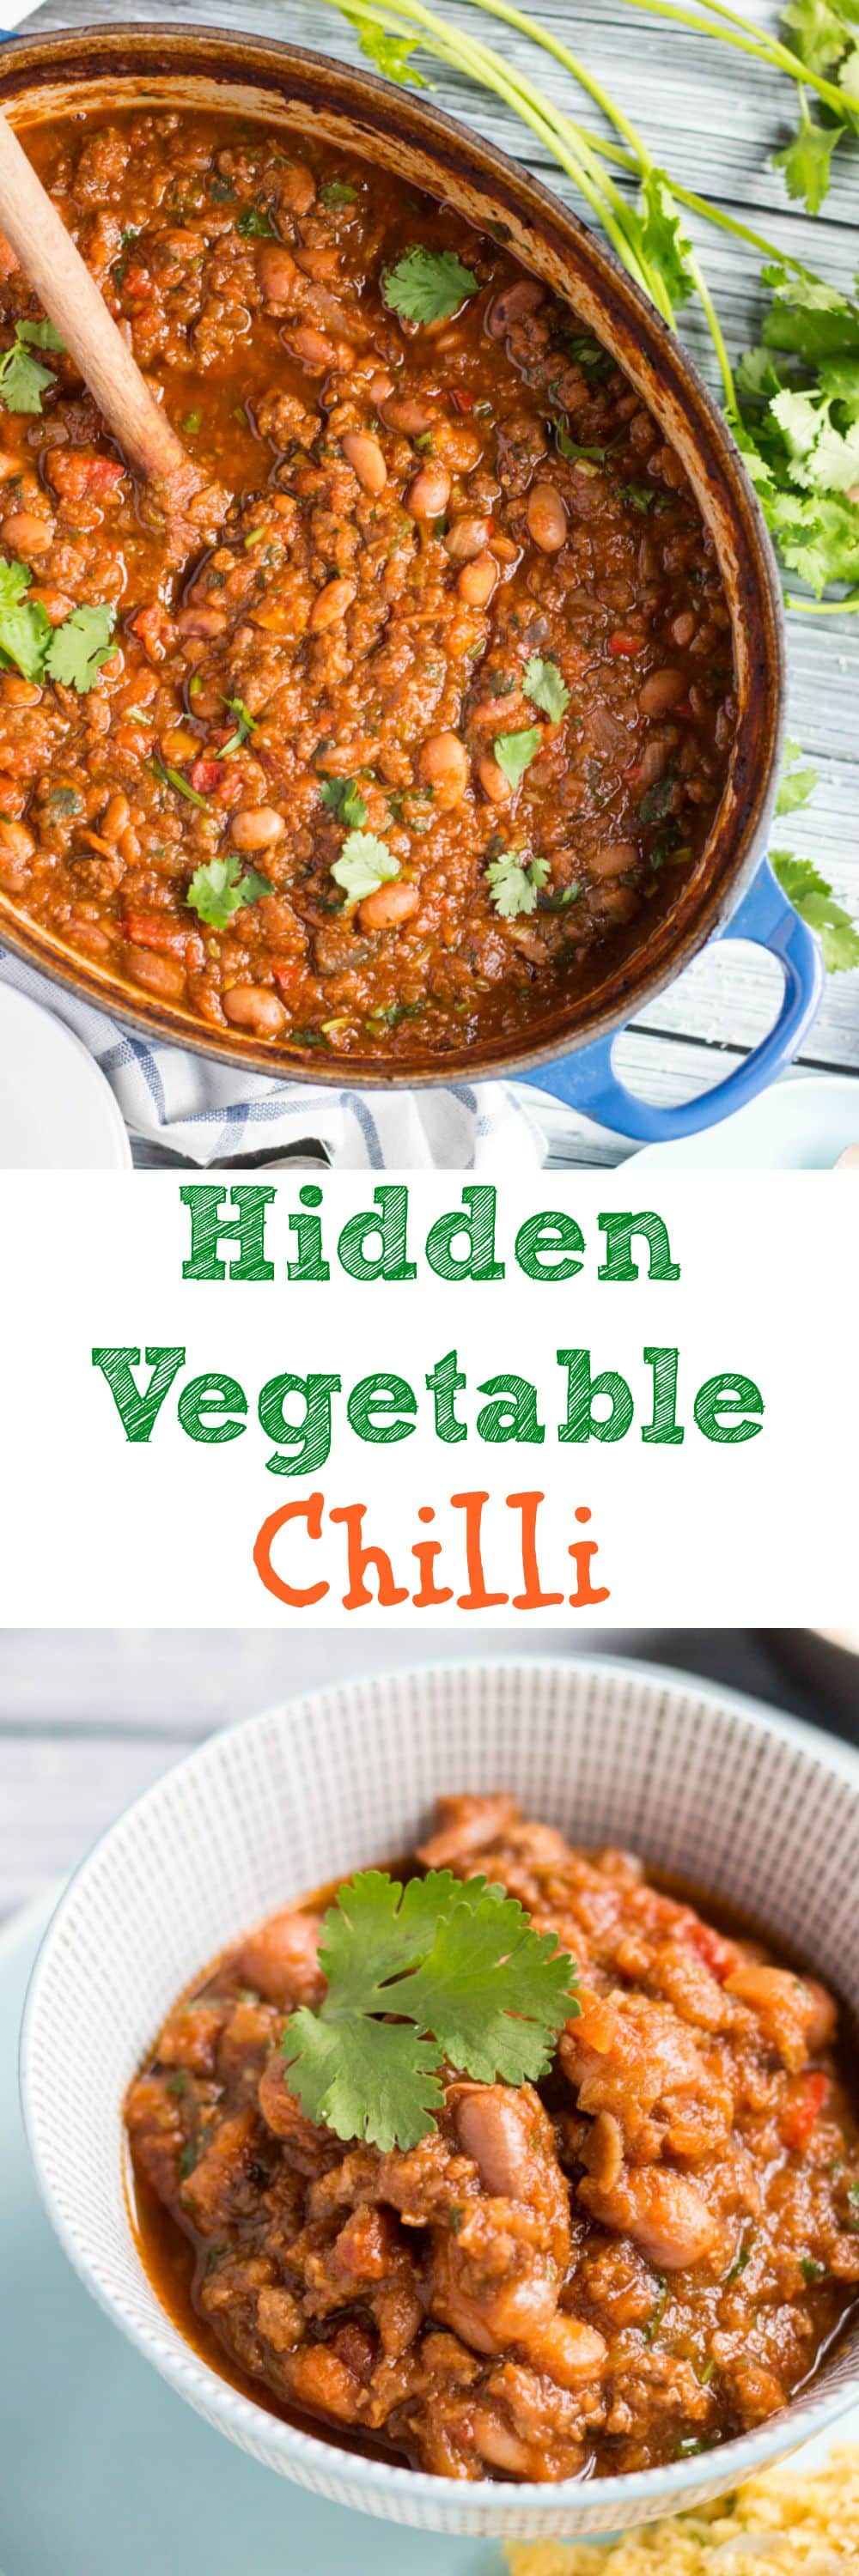 Oven Roasted Chilli with Hidden Vegetables. Six vegetables, seven if you count the beans. 